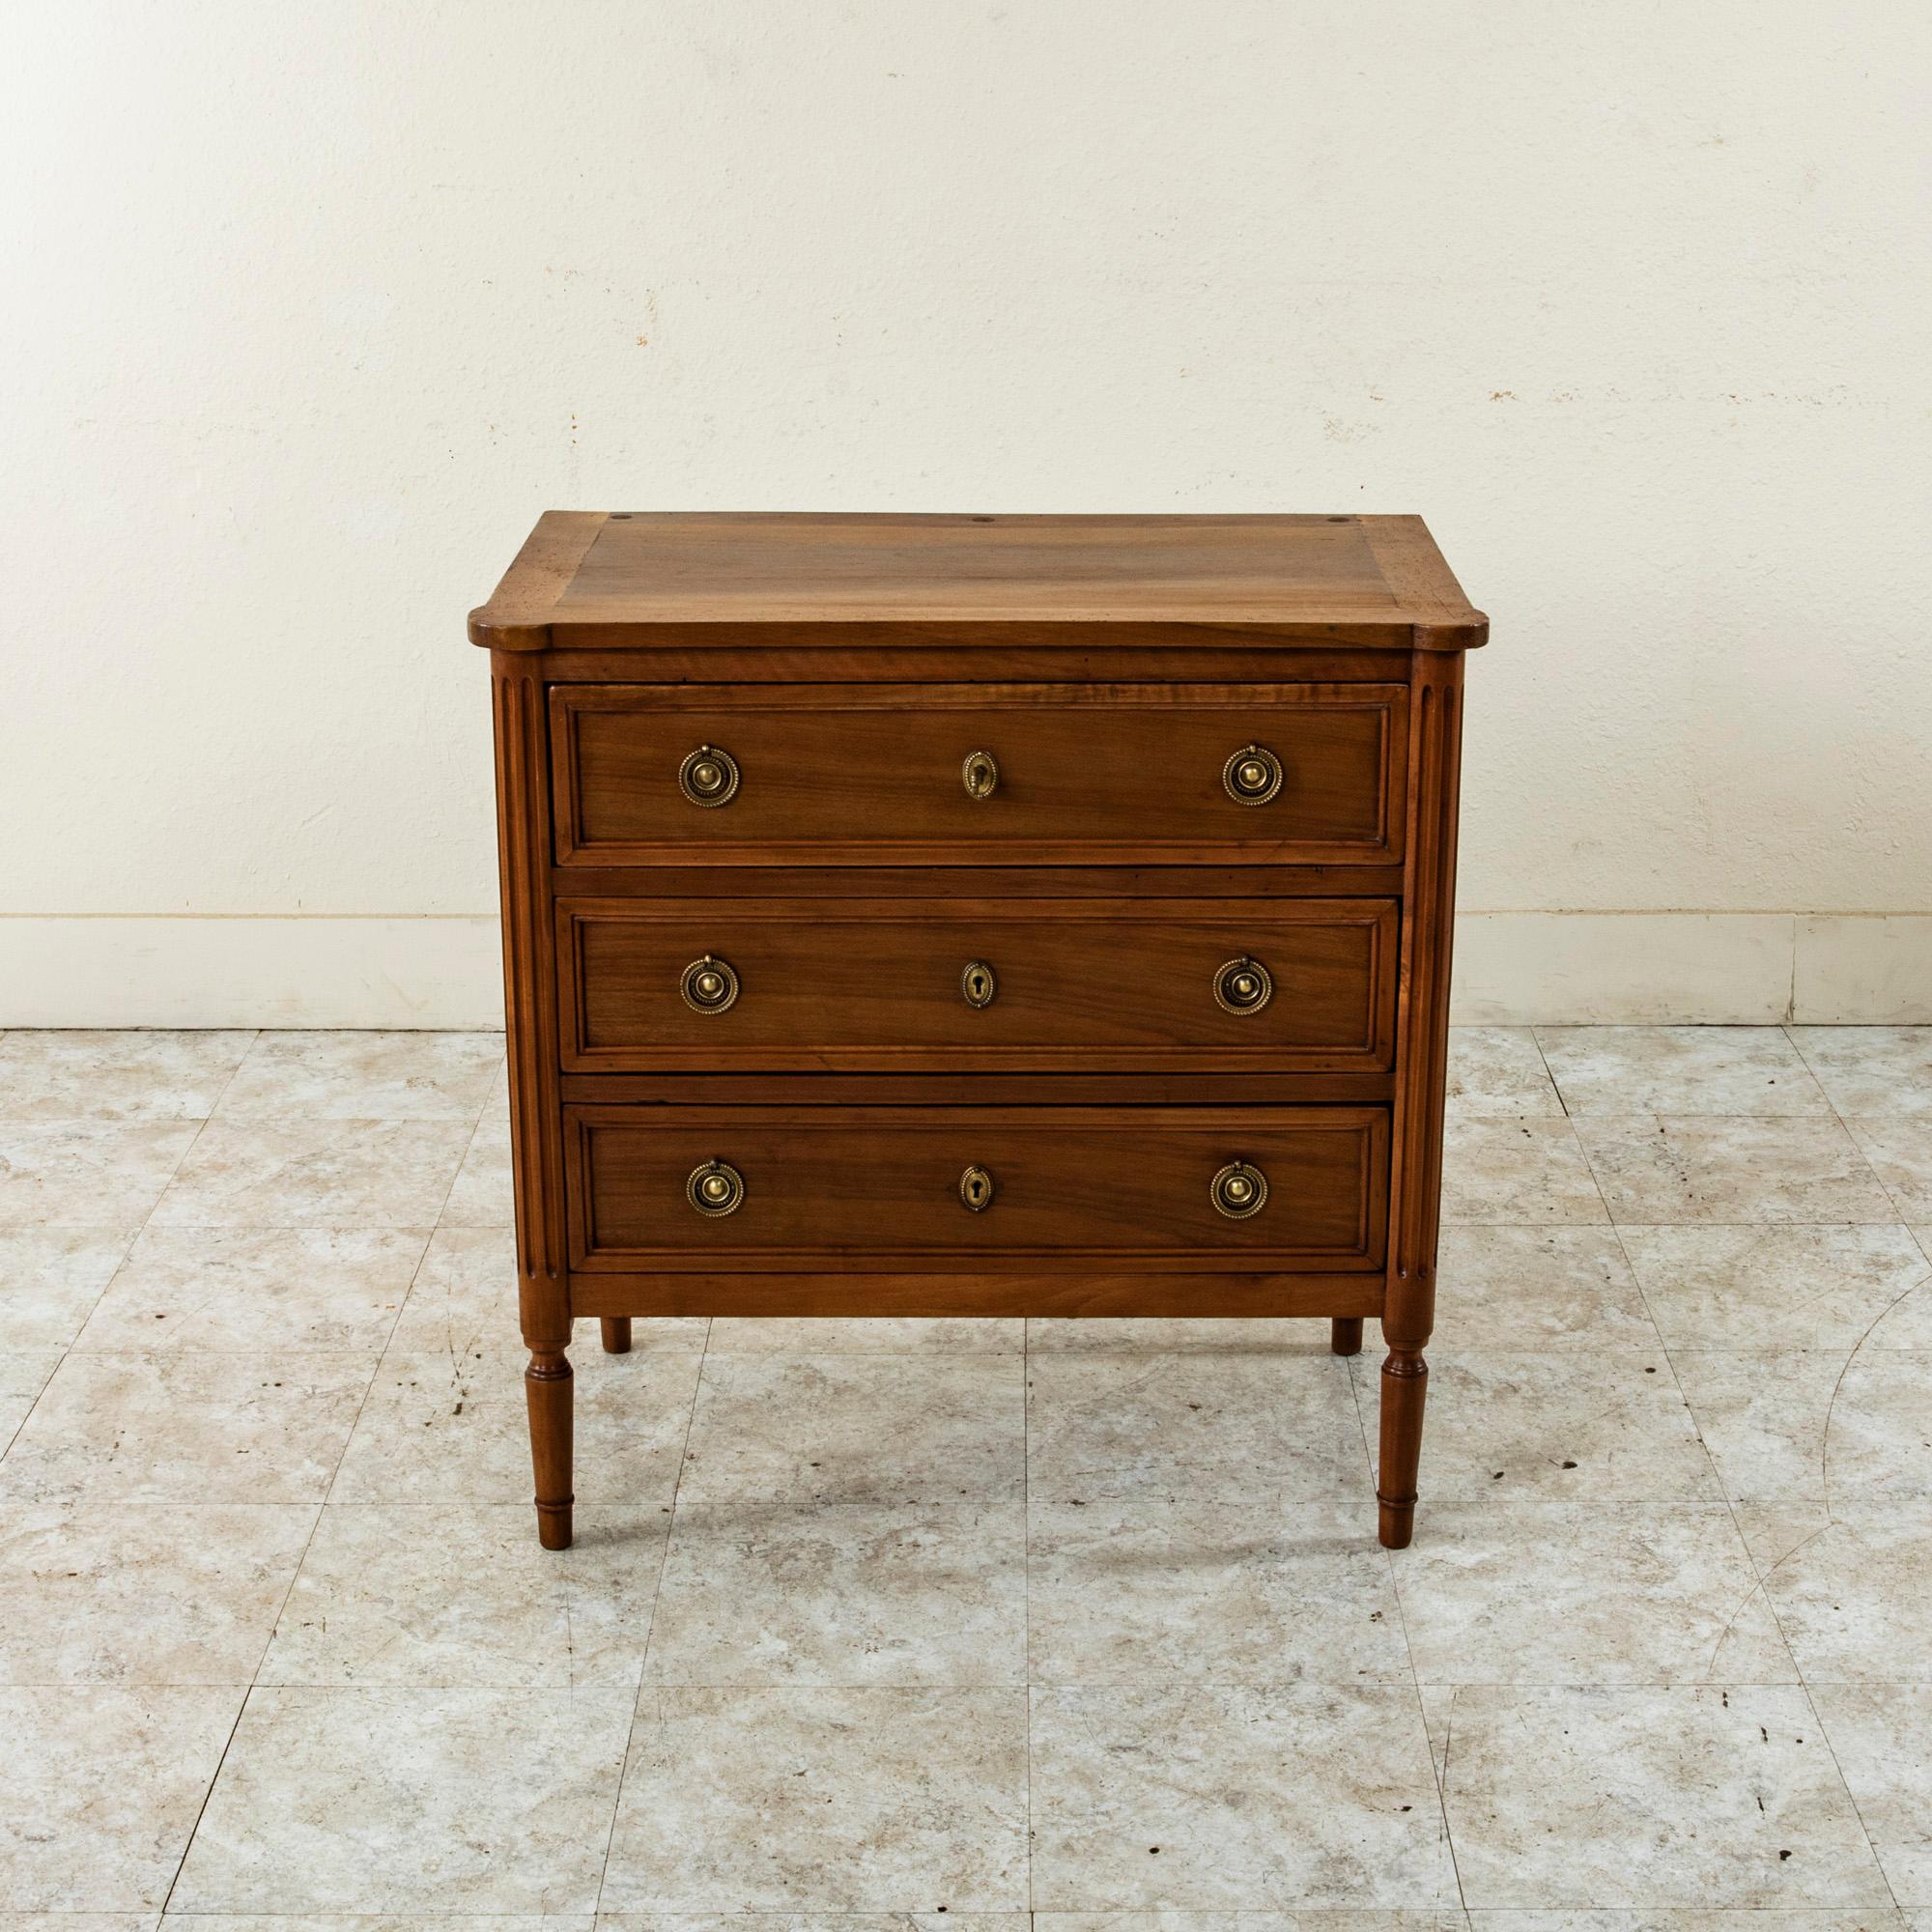 With only 31 inches in width, this small scale late nineteenth century French Louis XVI style commode or chest of drawers is constructed of solid walnut and features rounded fluted corners flanking it drawers. Its three drawers of dovetail